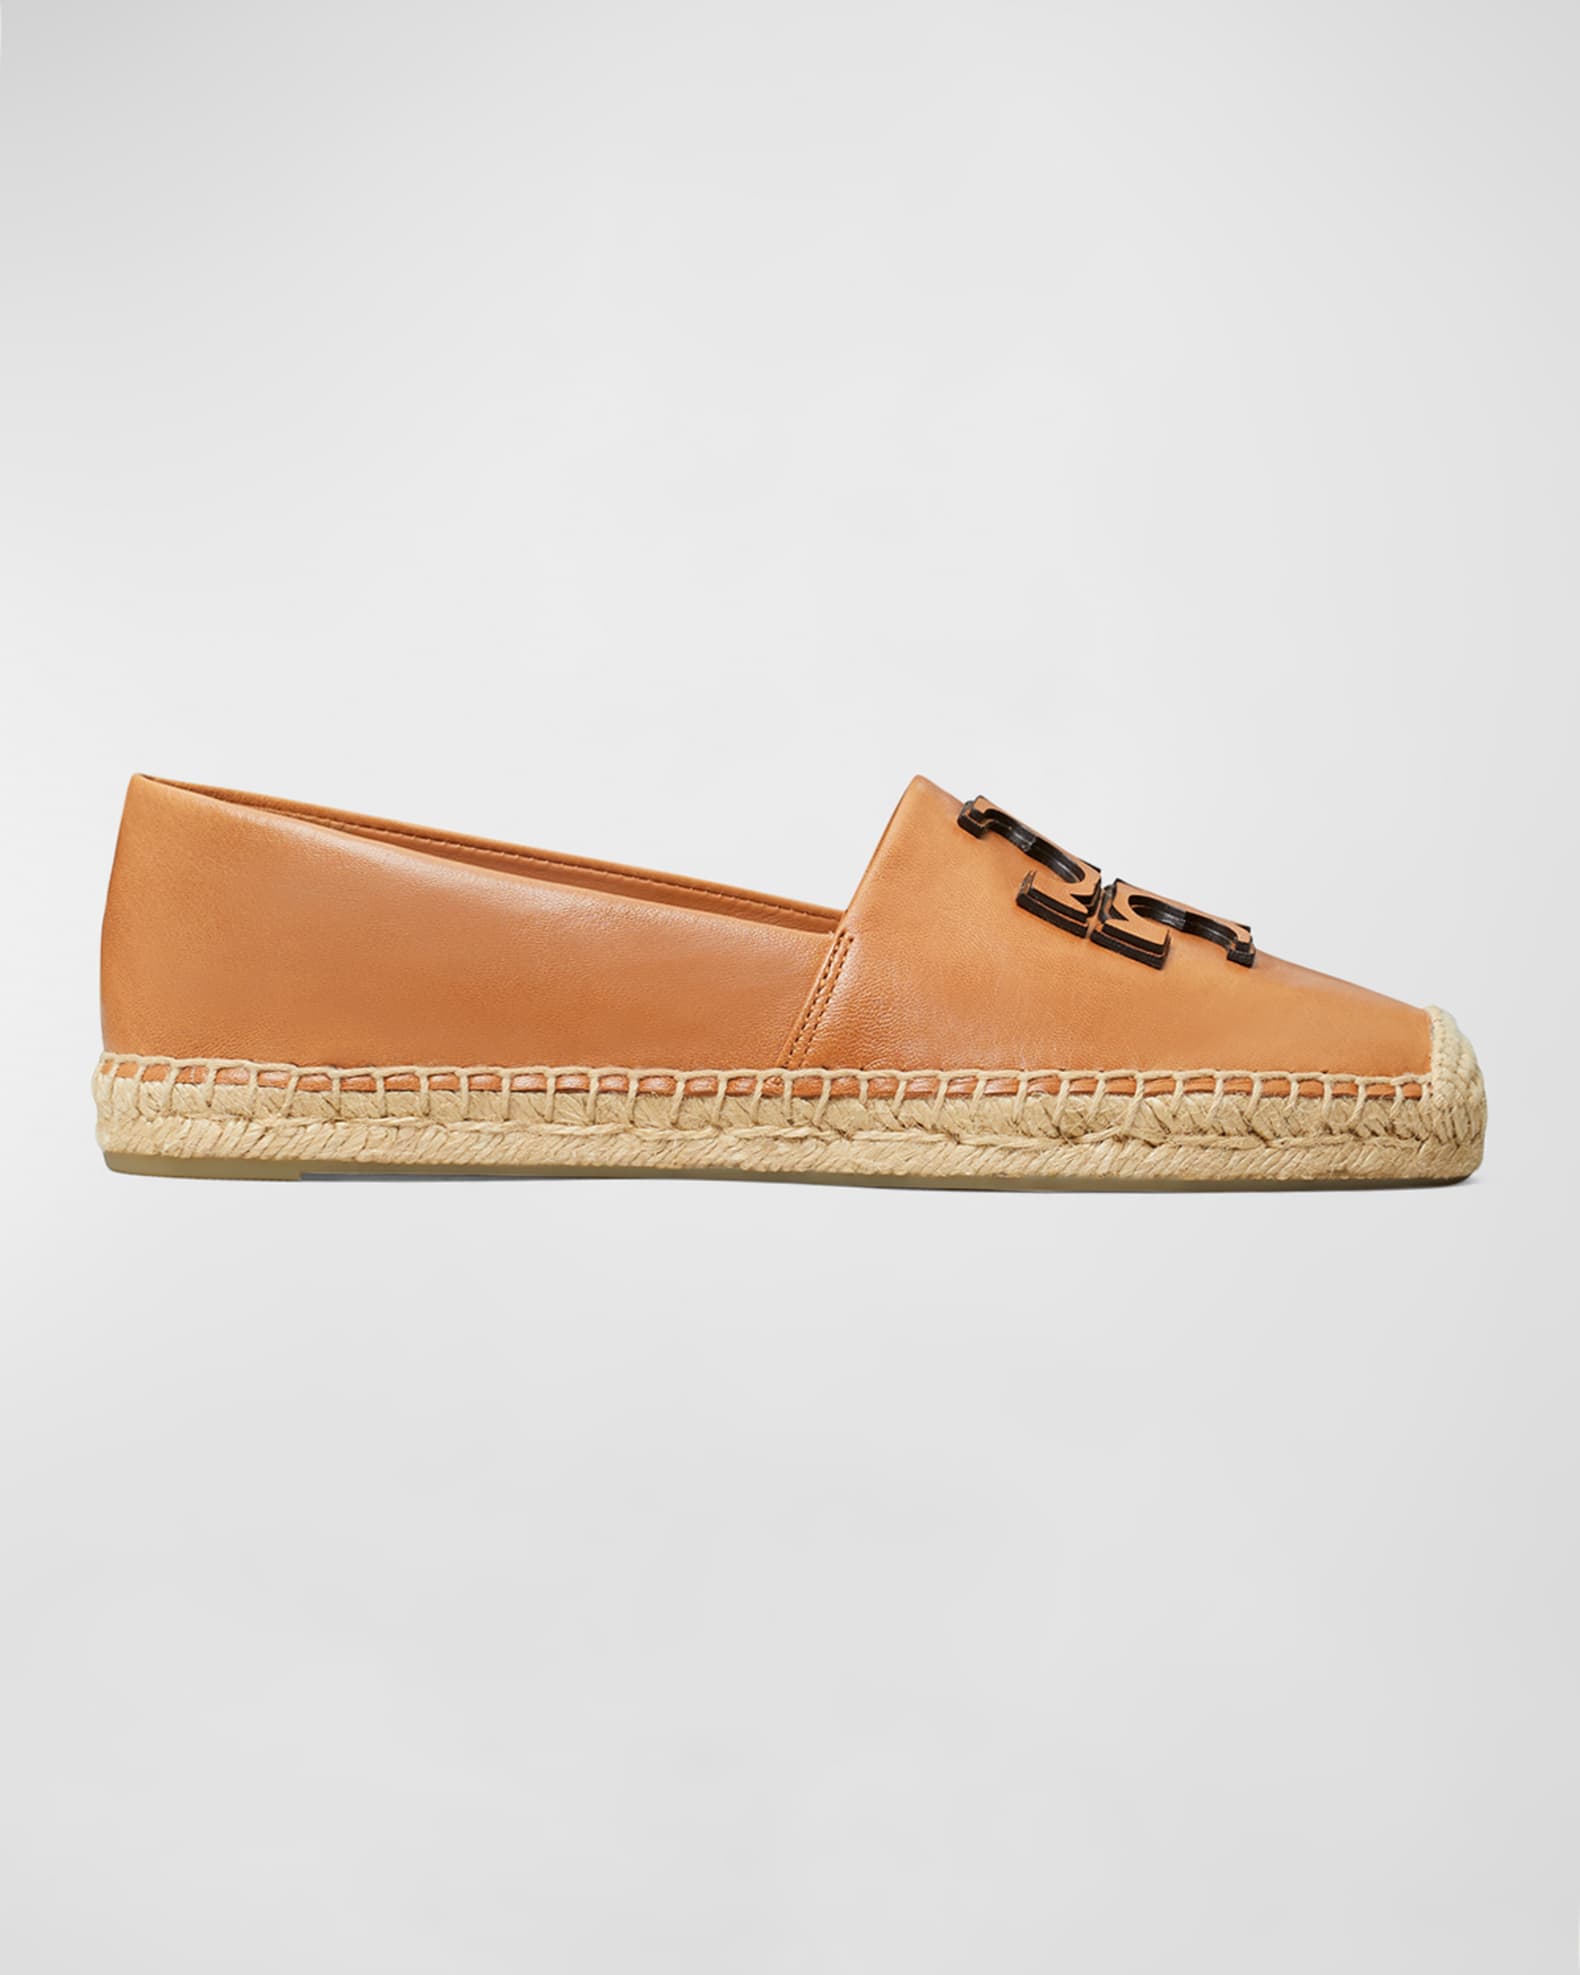 Tory Burch Ines Leather Double T Espadrilles | Neiman Marcus